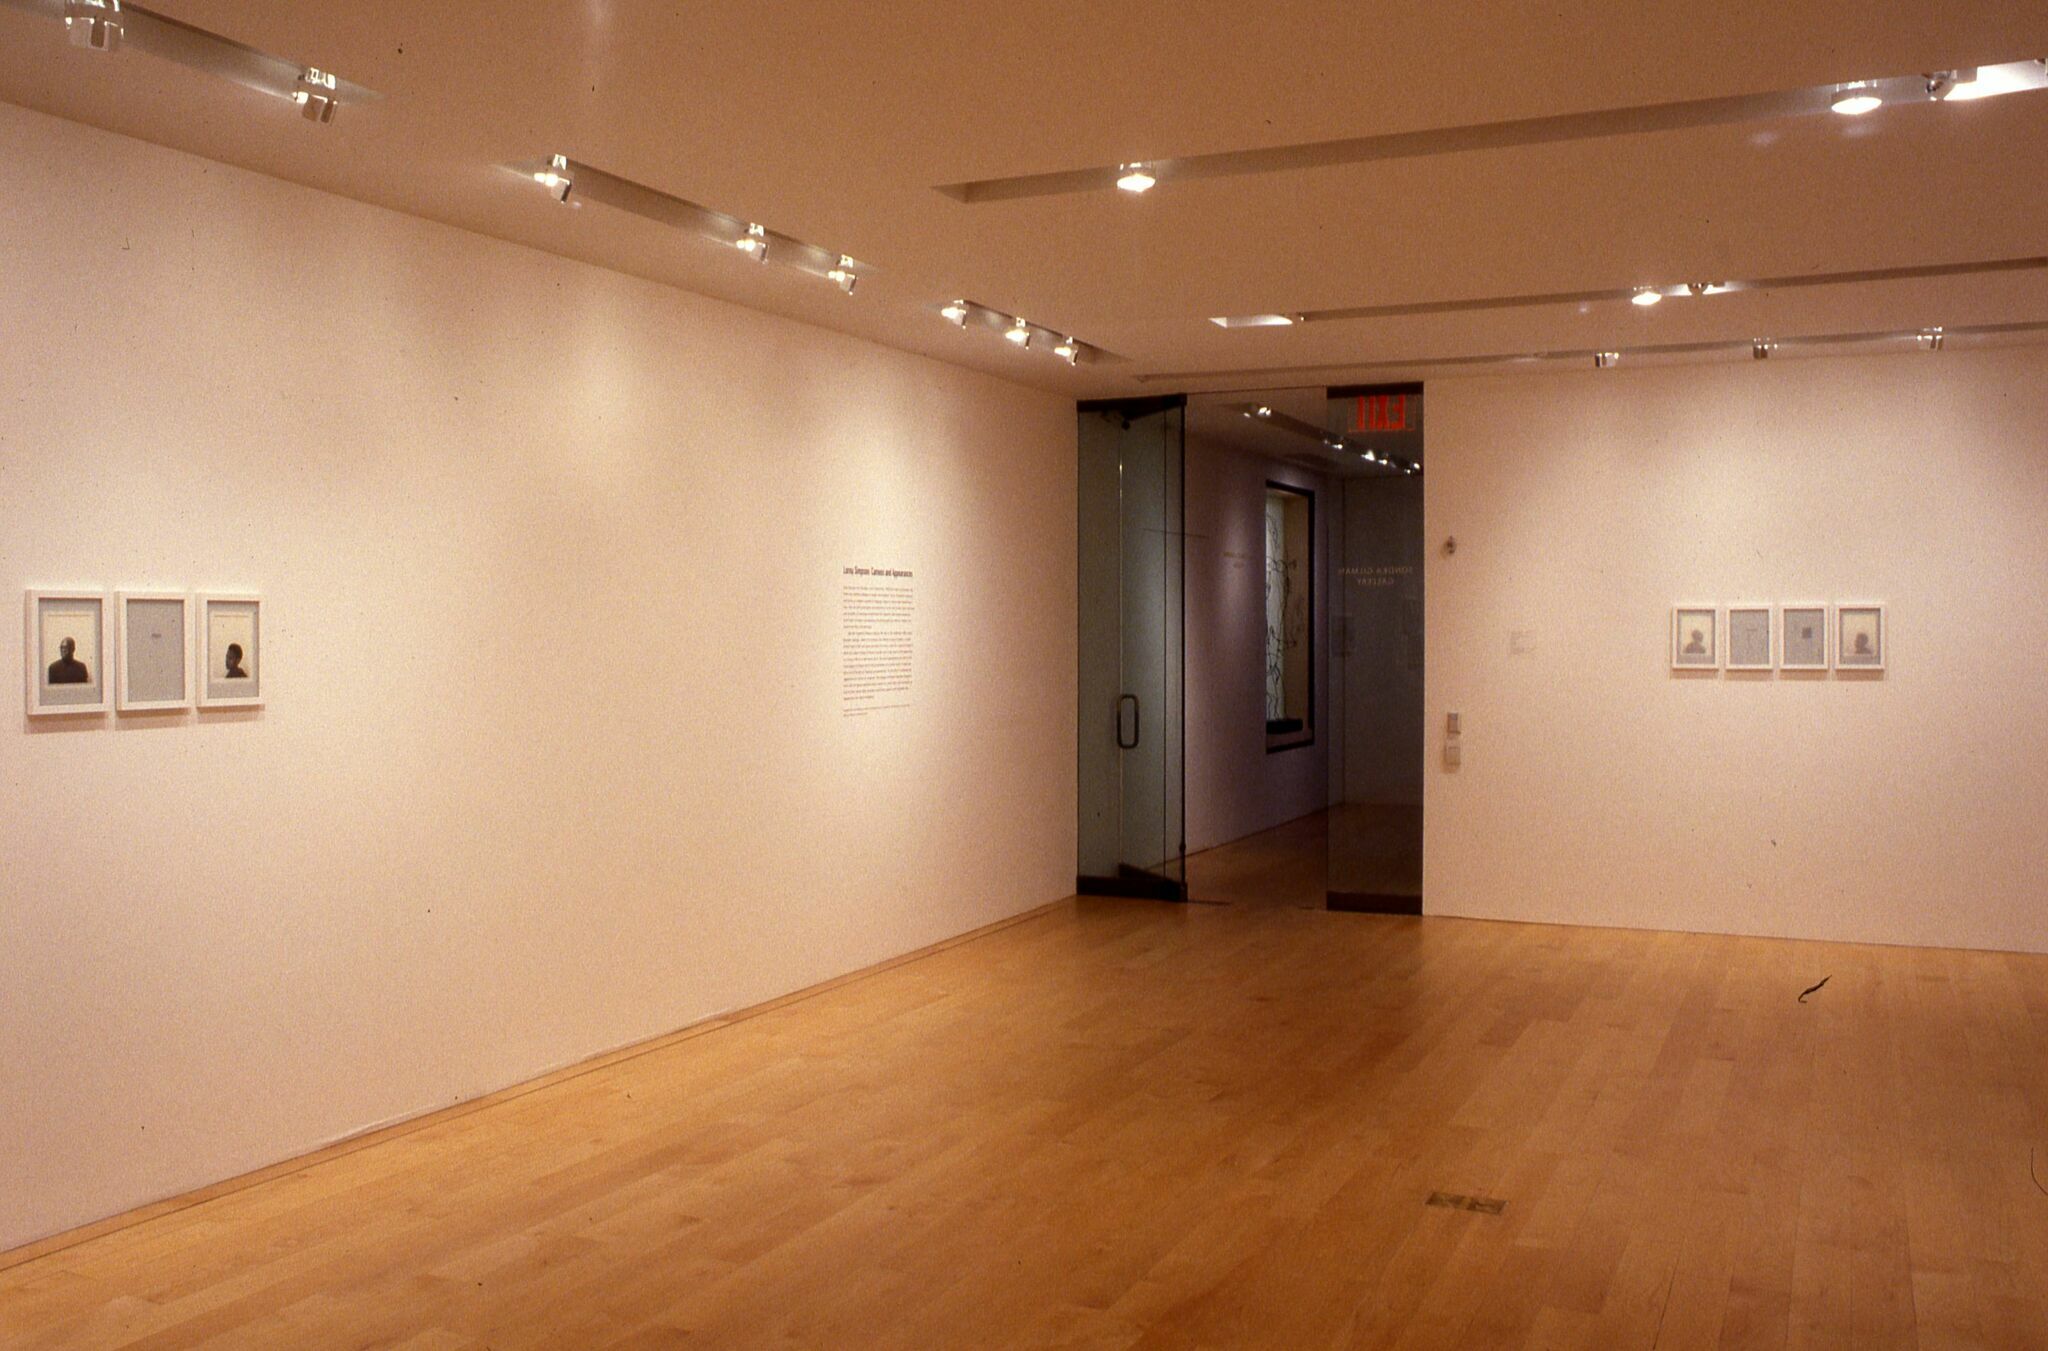 A gallery with art displayed on the walls along with wall text for Lorna Simpson: Cameos and Appearances.